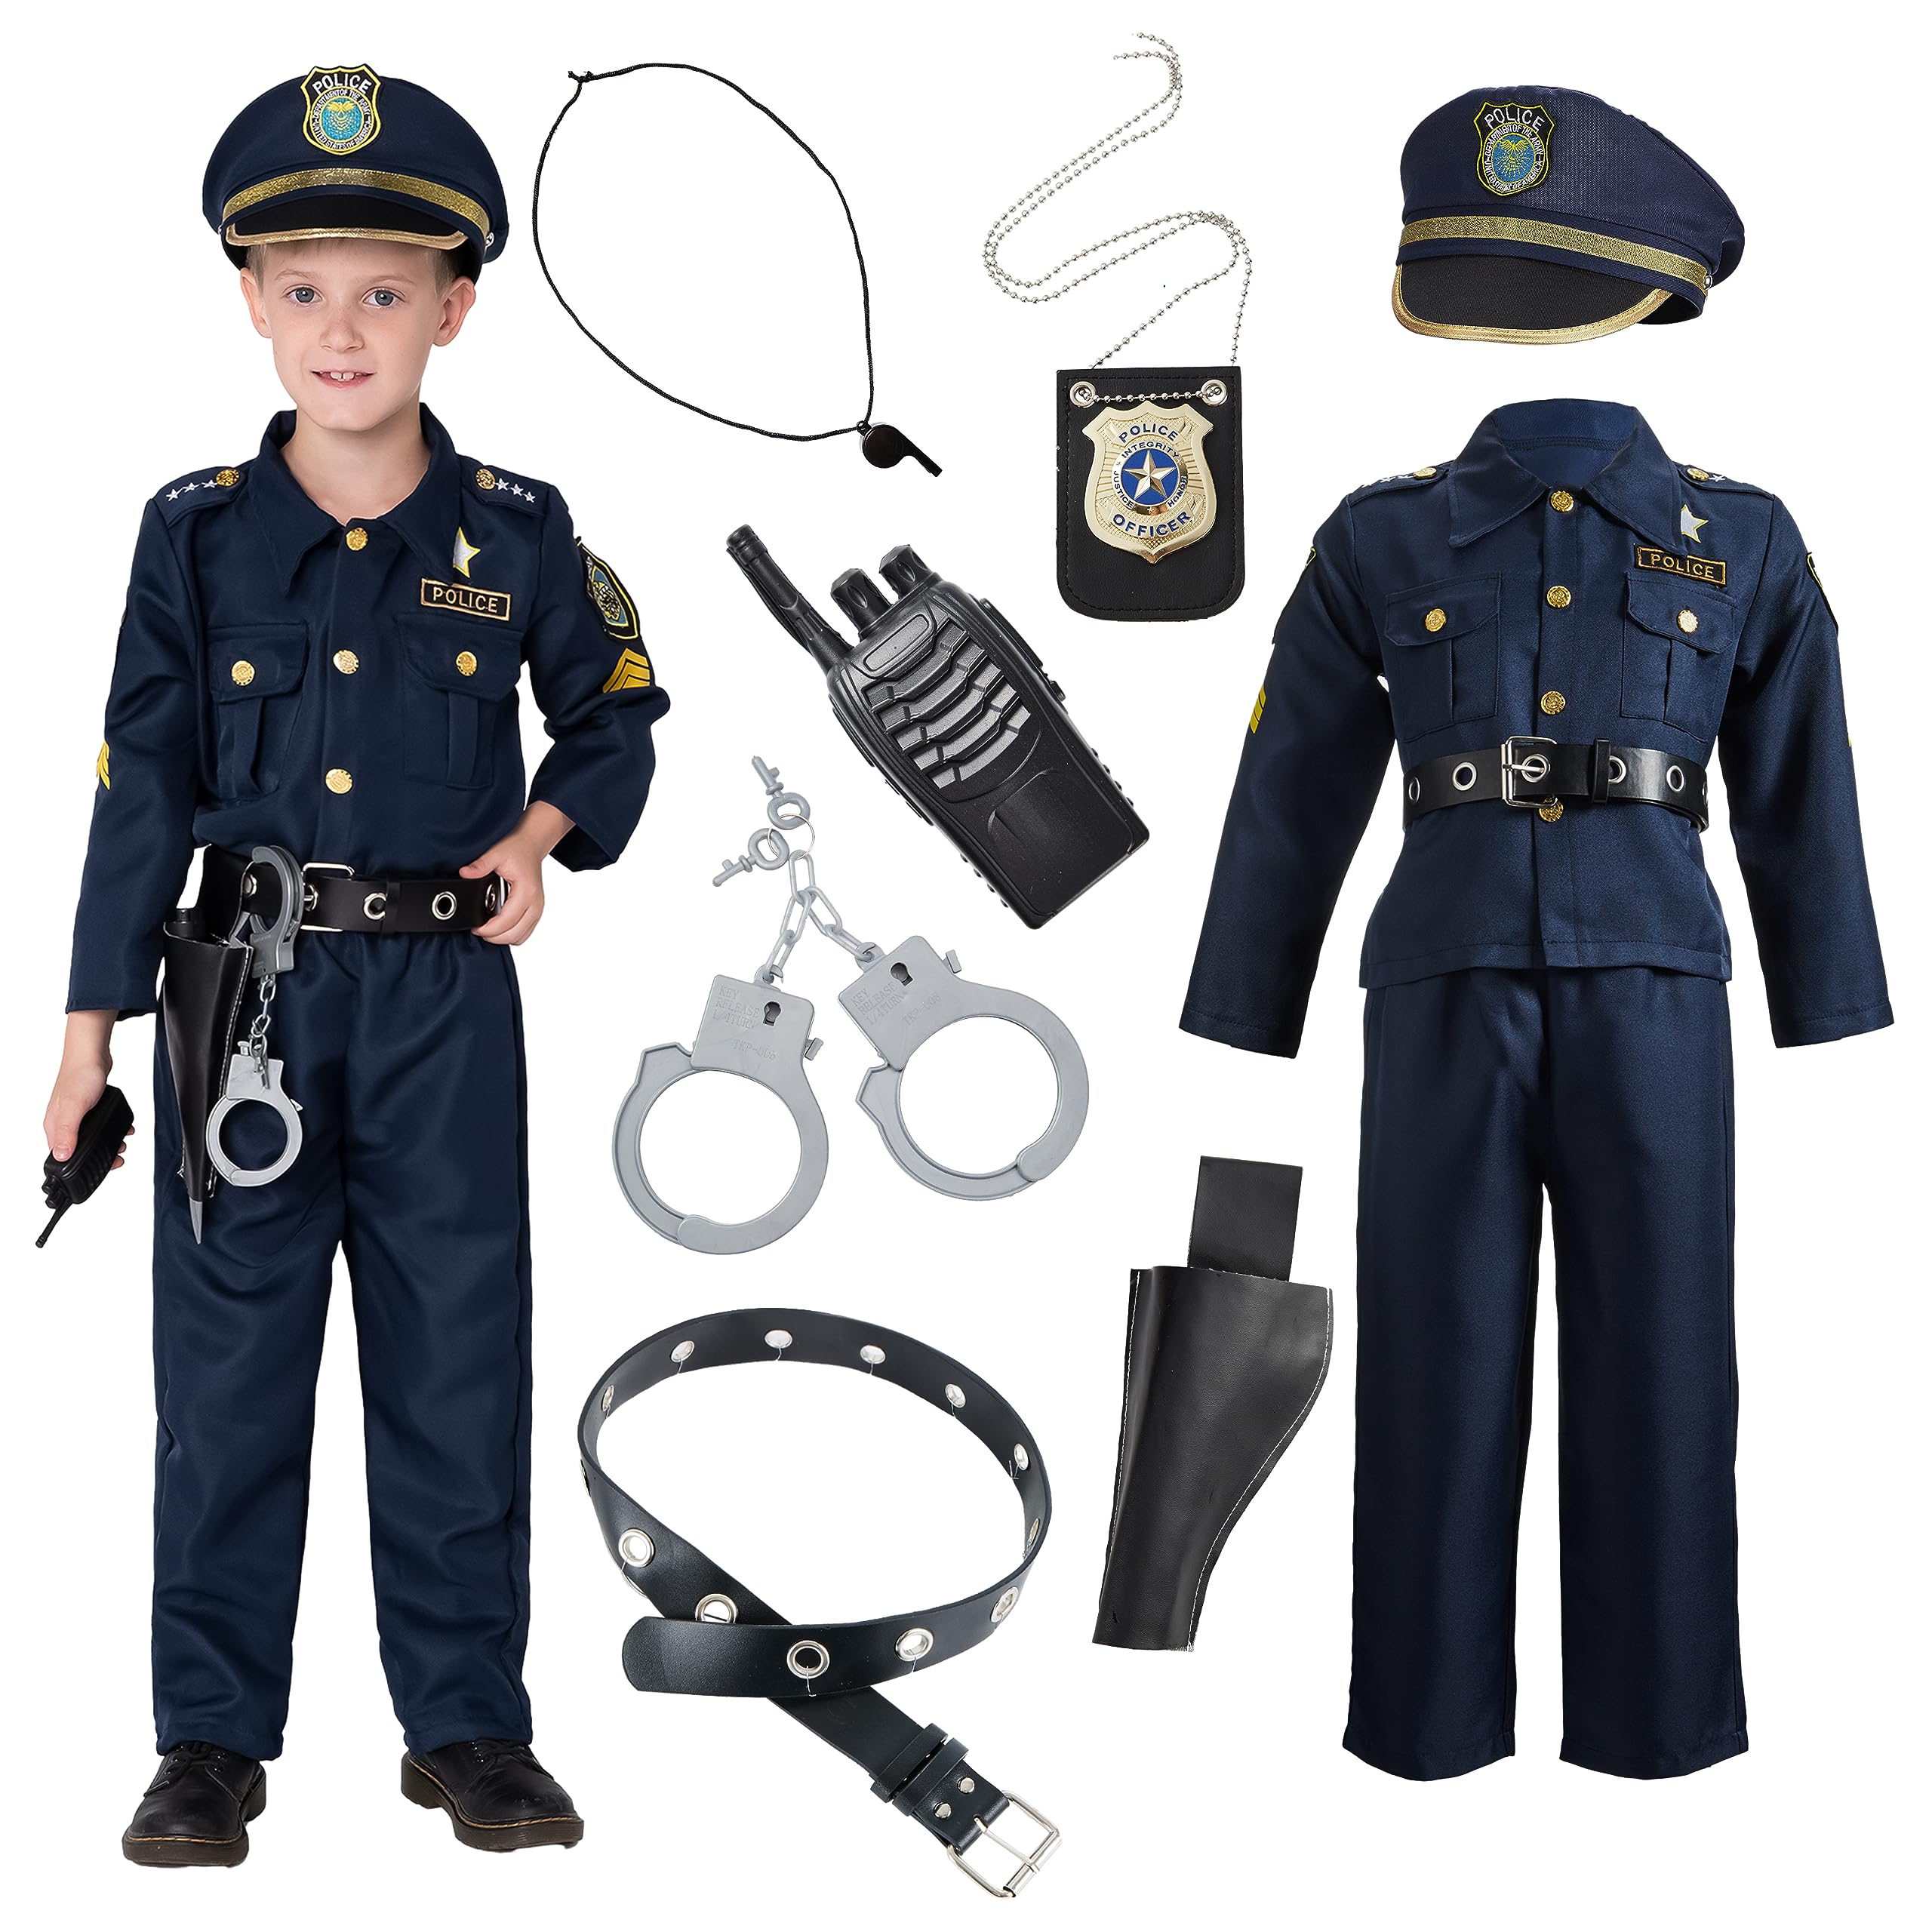 JOYIN Toy Deluxe Police Officer Costume and Role Play Kit for Kids Halloween Cosplay (Medium)